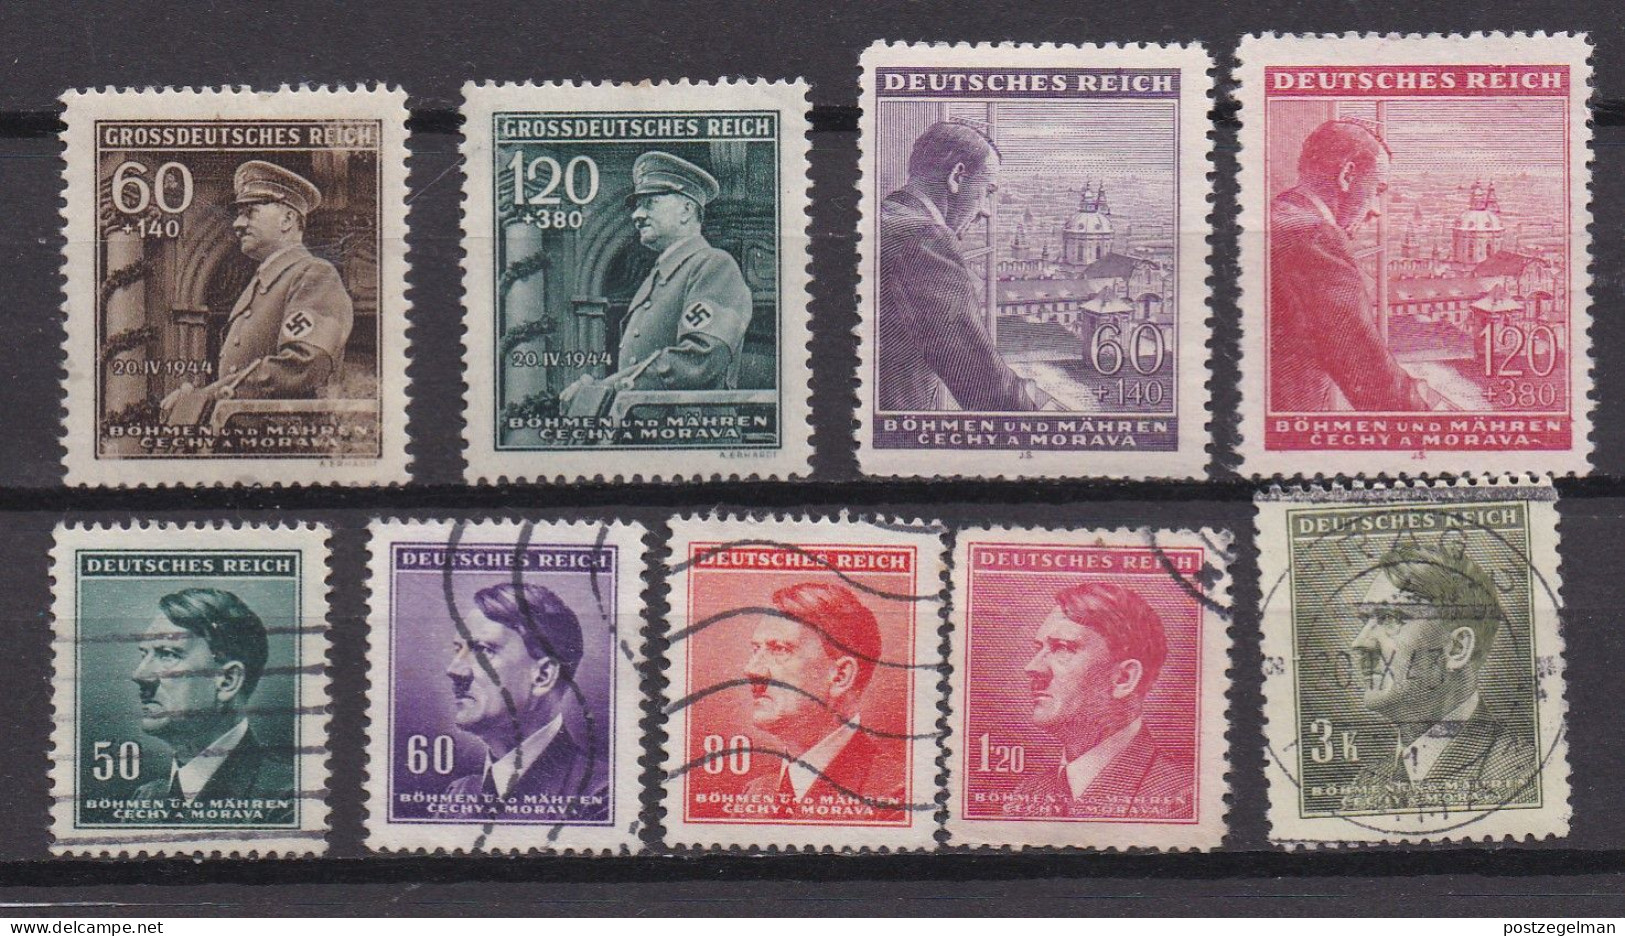 Bohemia & Moravia, 1942, Used Stamp(s) ,  Adolf Various Hitler , Michelnr.  89=110,  Scannr. 12939 (9 Values Only) - Used Stamps